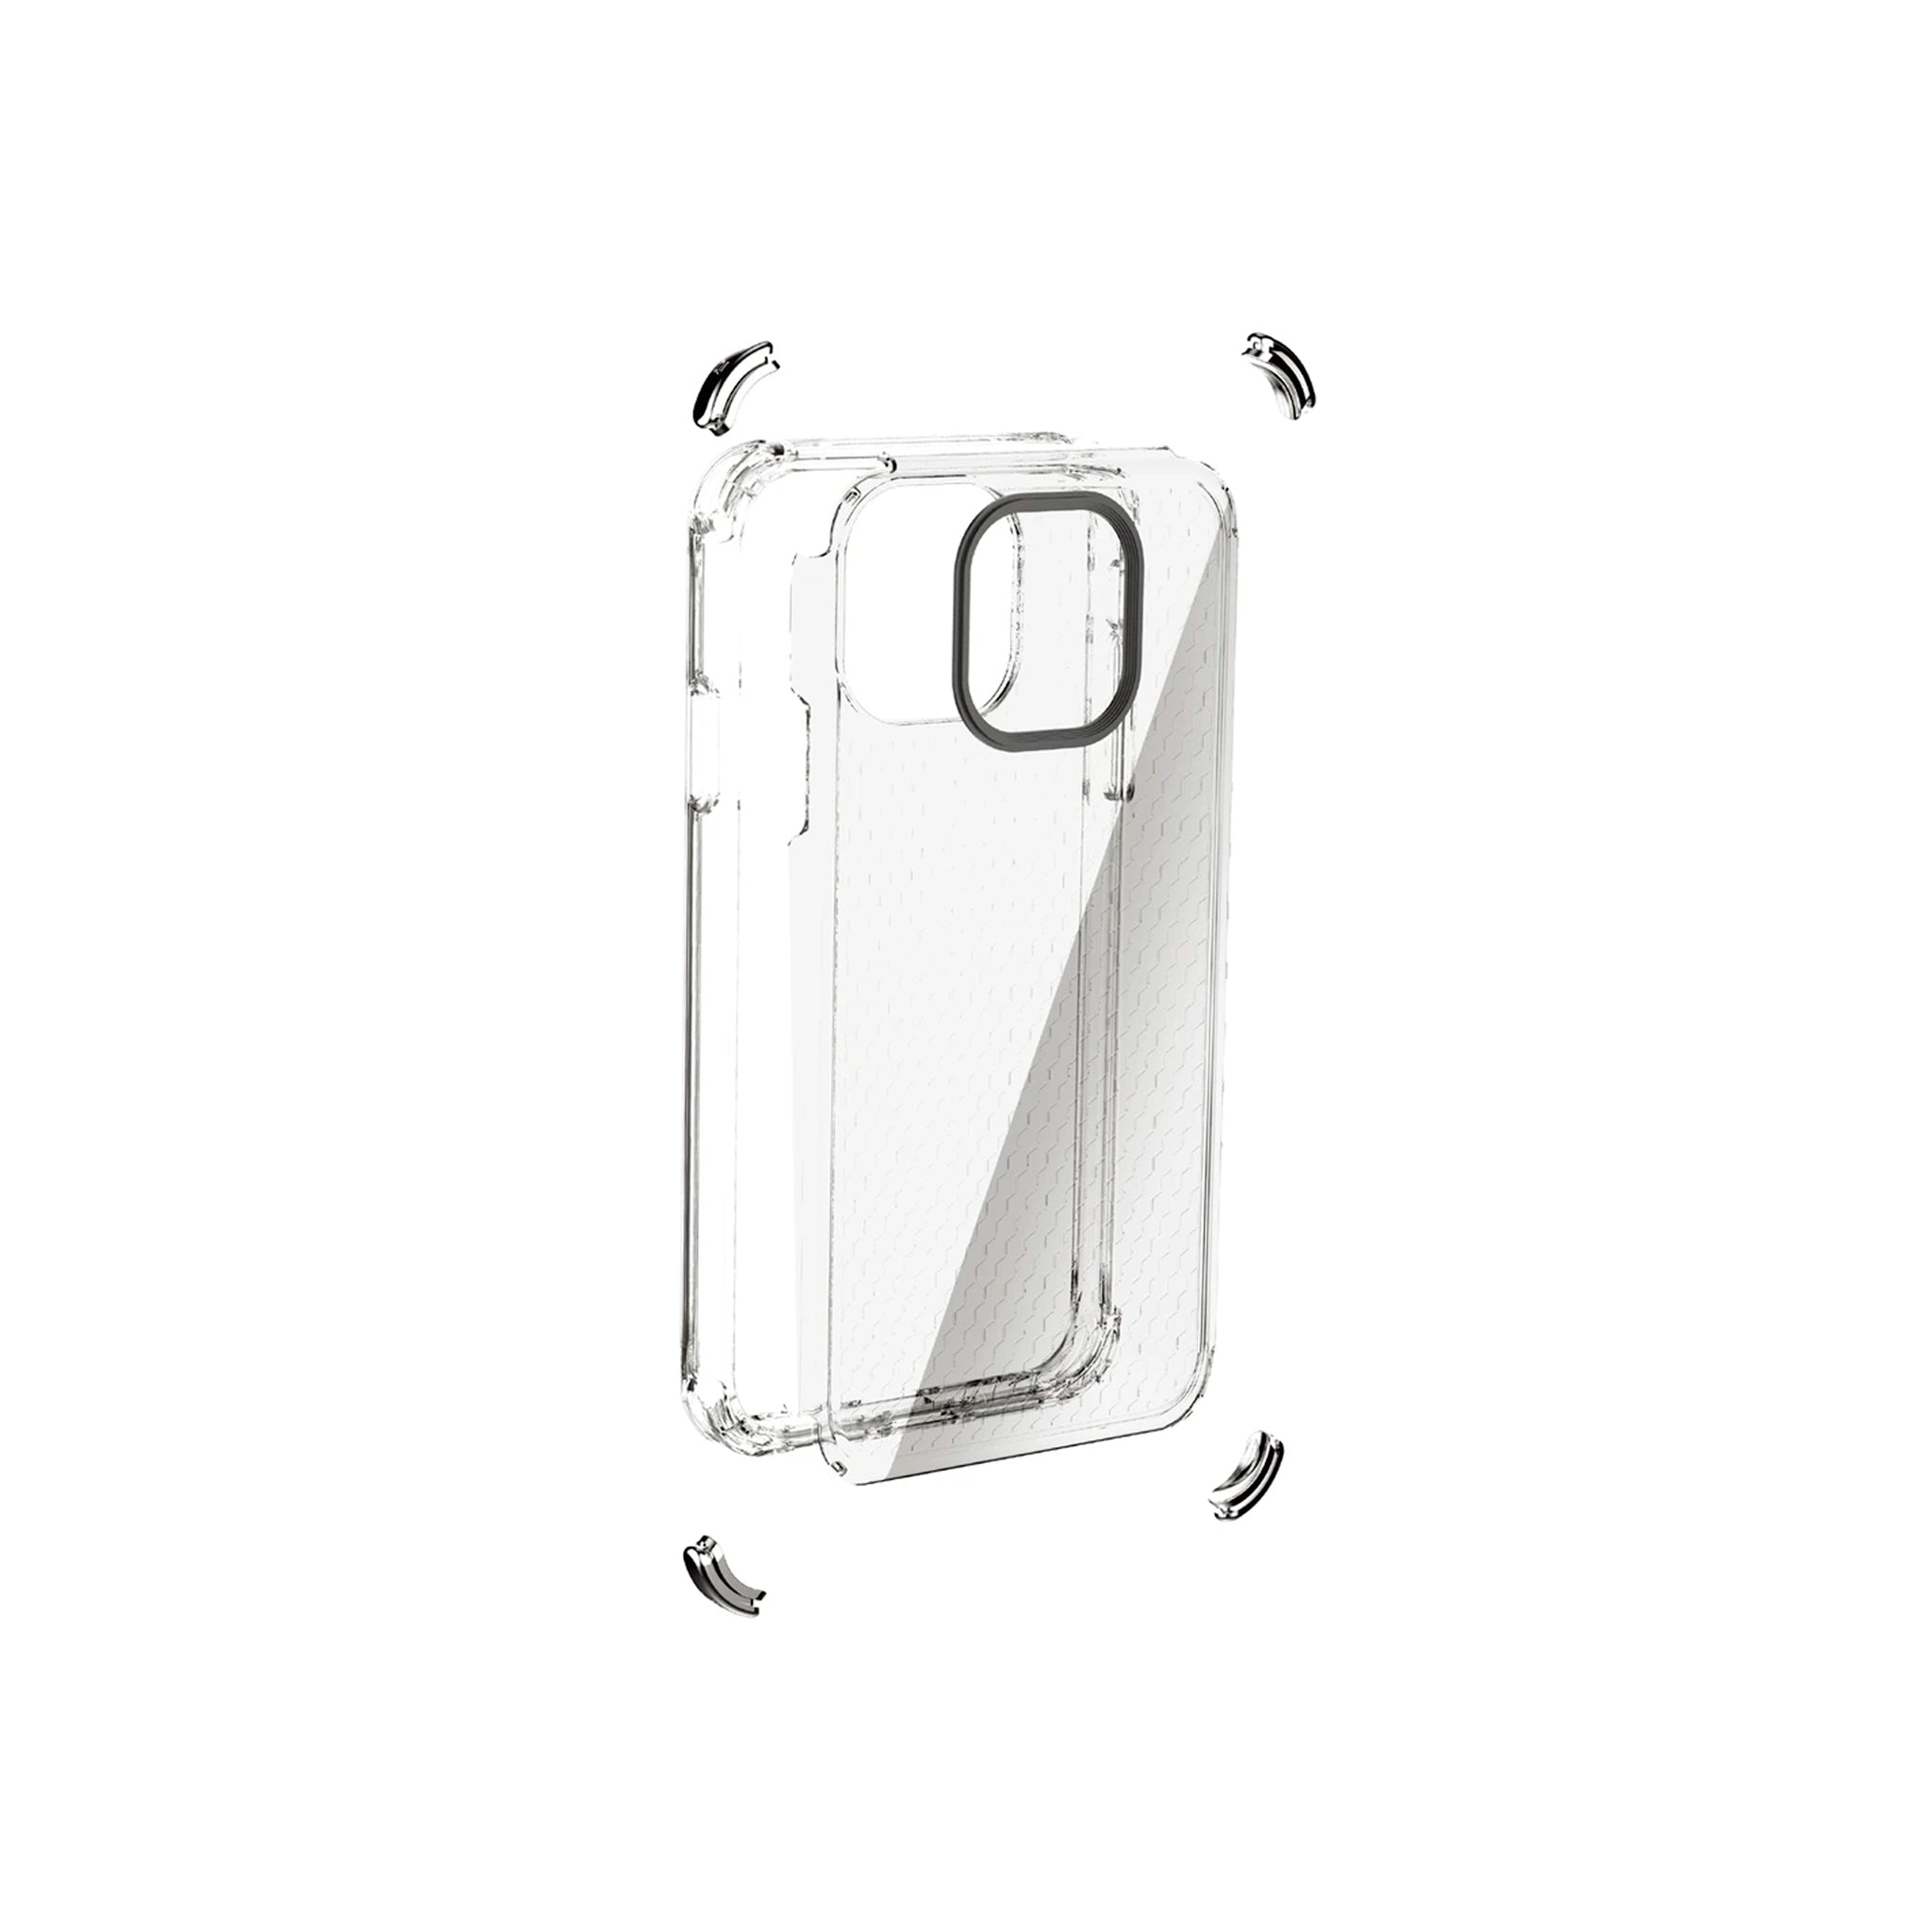 Ballistic - Jewel Spark Series For iPhone 11 - Clear